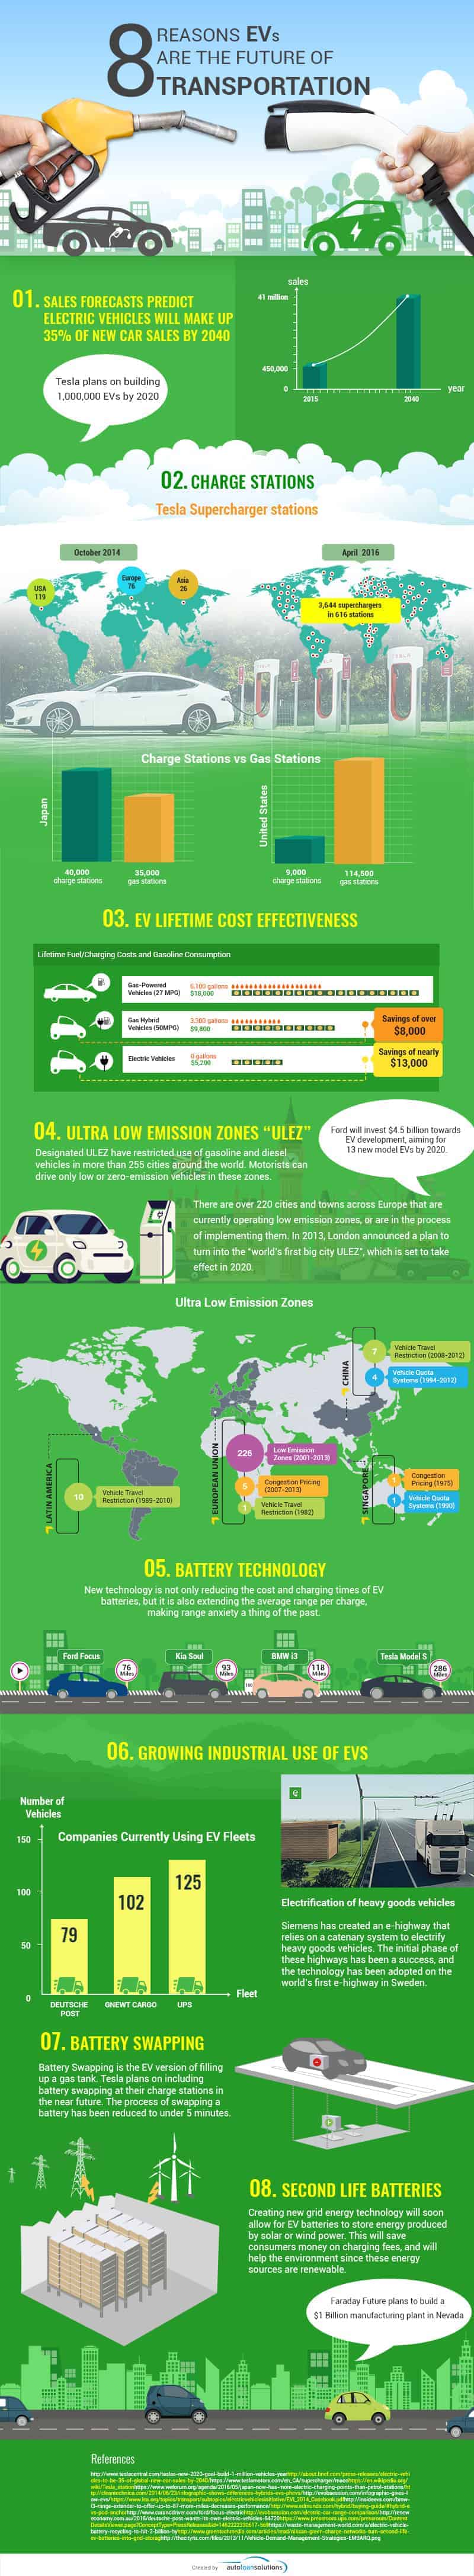 electric-vehicles-are-the-future